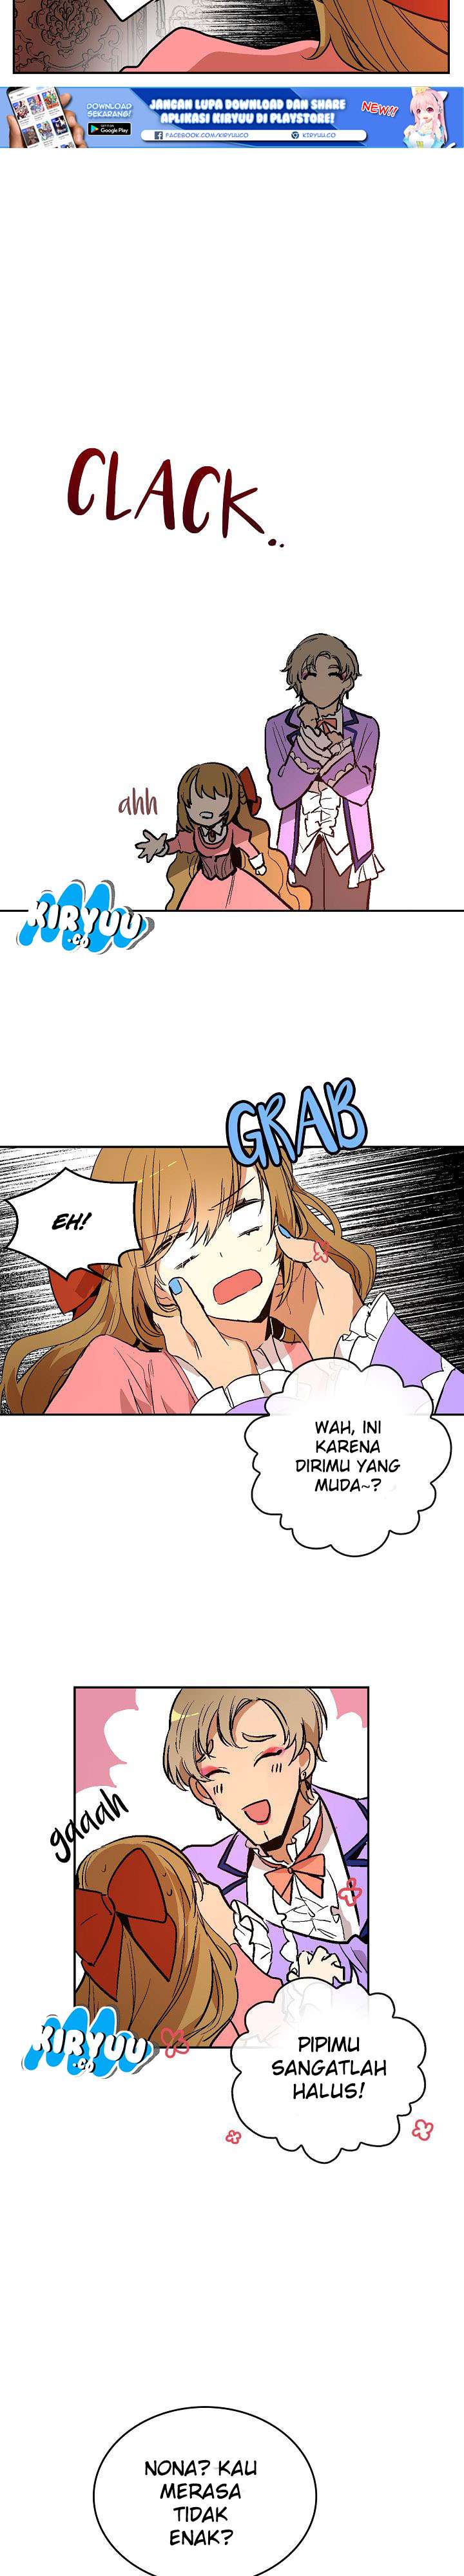 The Reason Why Raeliana Ended Up at the Duke’s Mansion Chapter 13 Bahasa Indonesia